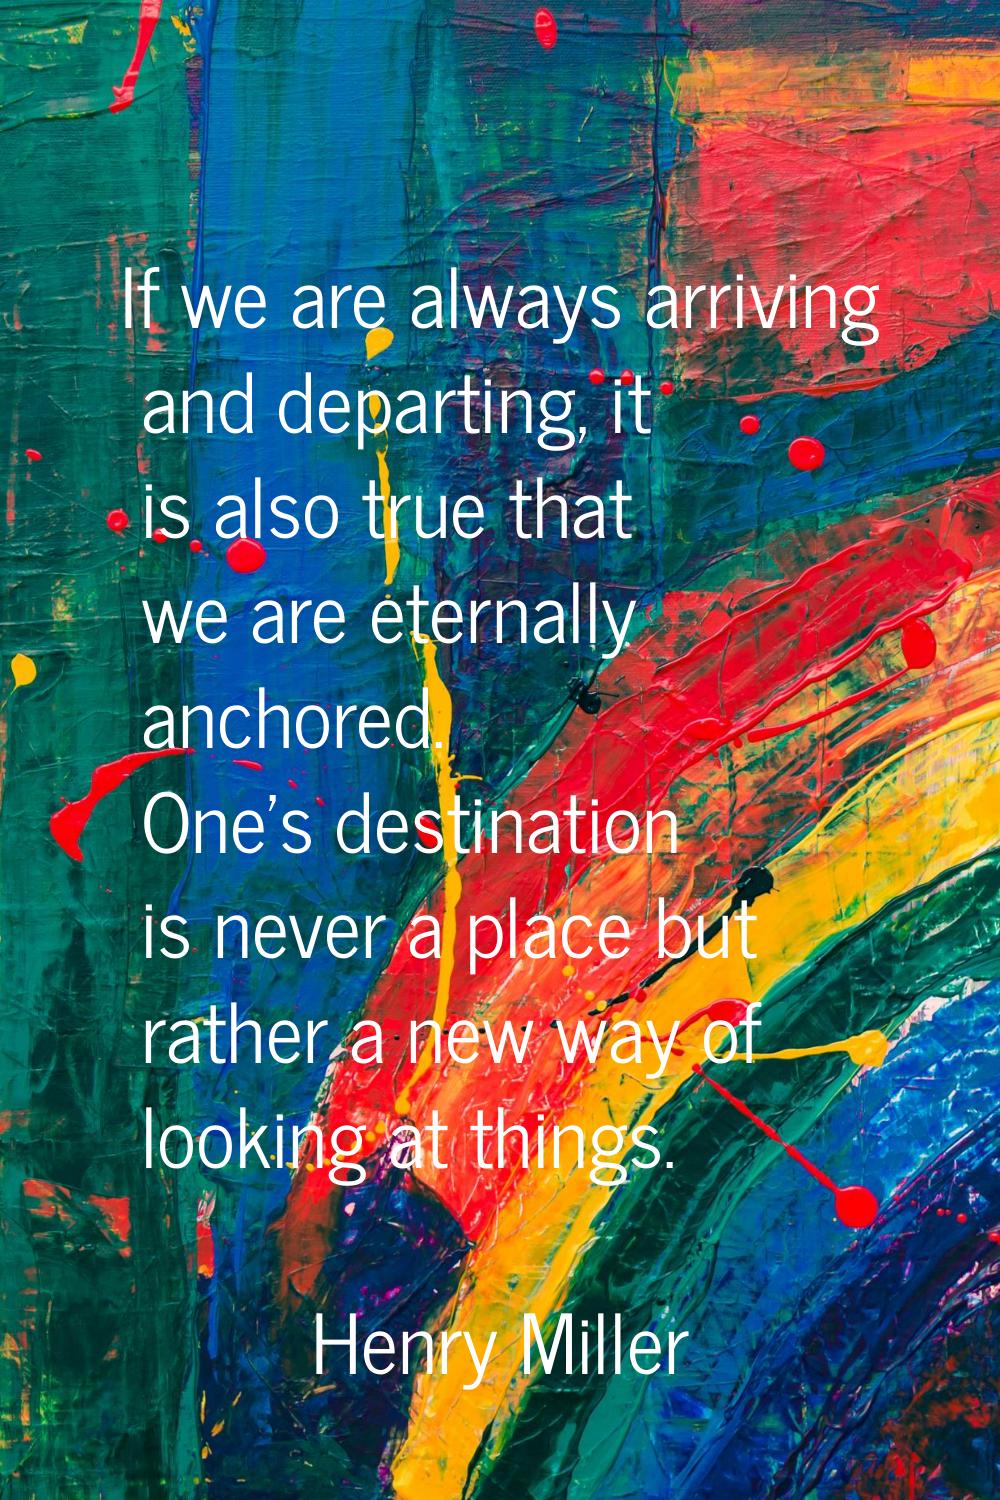 If we are always arriving and departing, it is also true that we are eternally anchored. One's dest